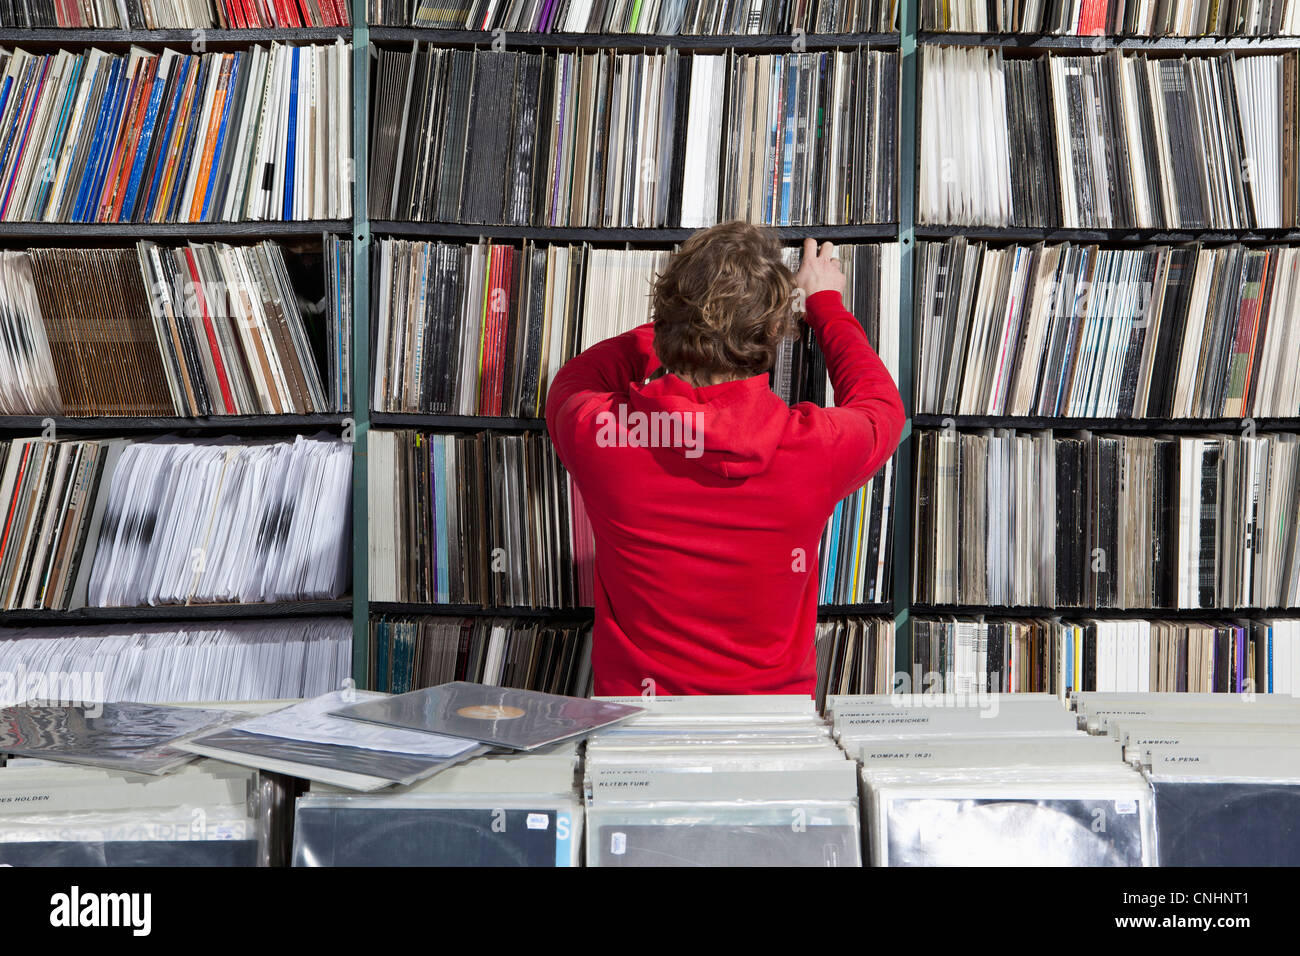 Where to Buy Vinyl Records (2023): Find New, Used, and Rare Vinyl